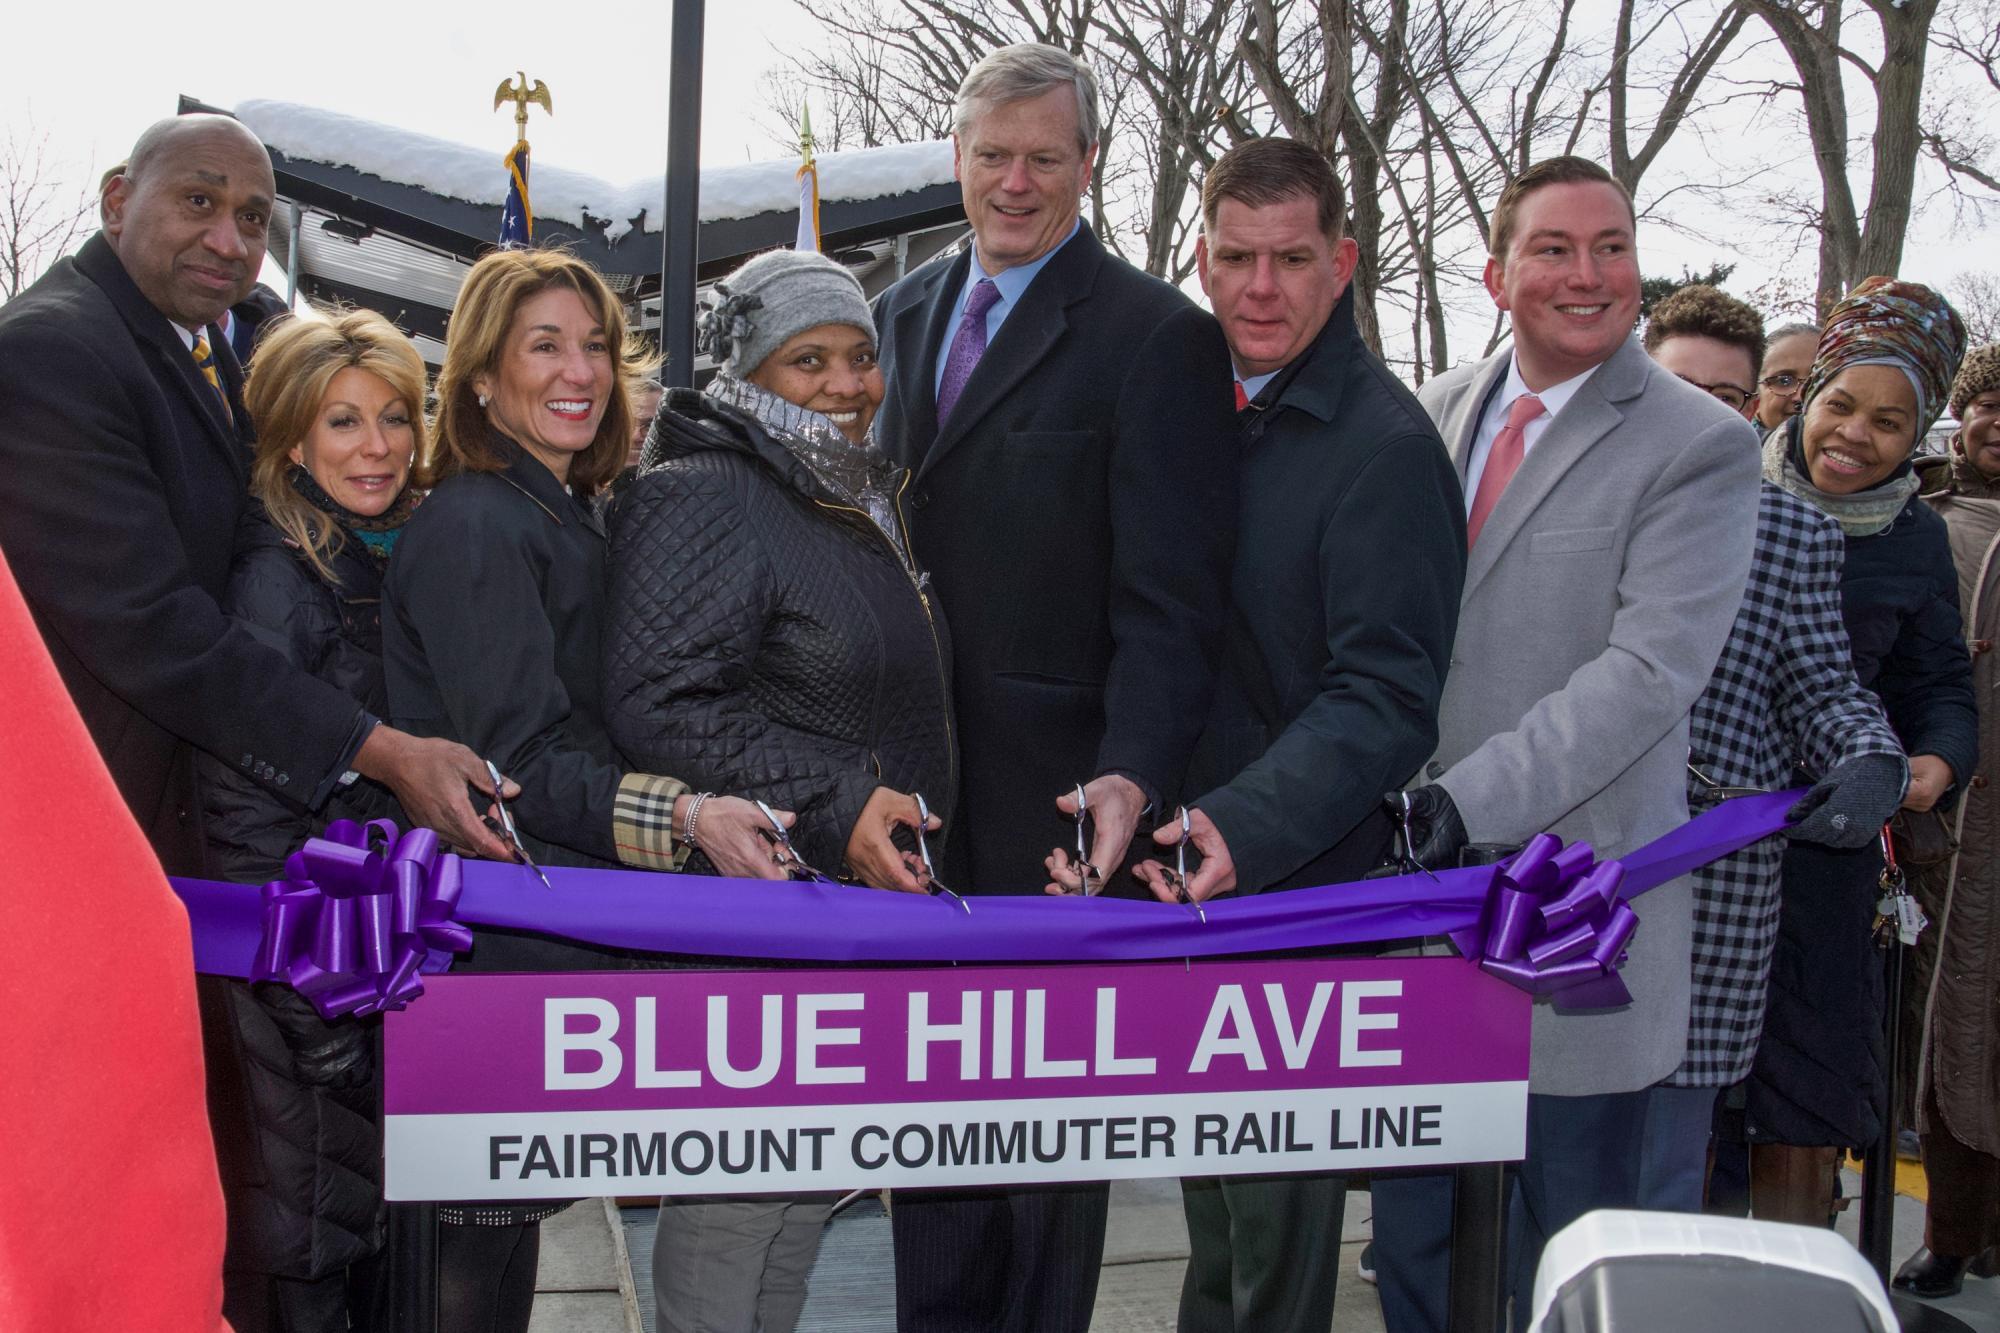 A group of elected officials and community members cut a purple ribbon to celebrate the opening of the Blue Hill Ave station.